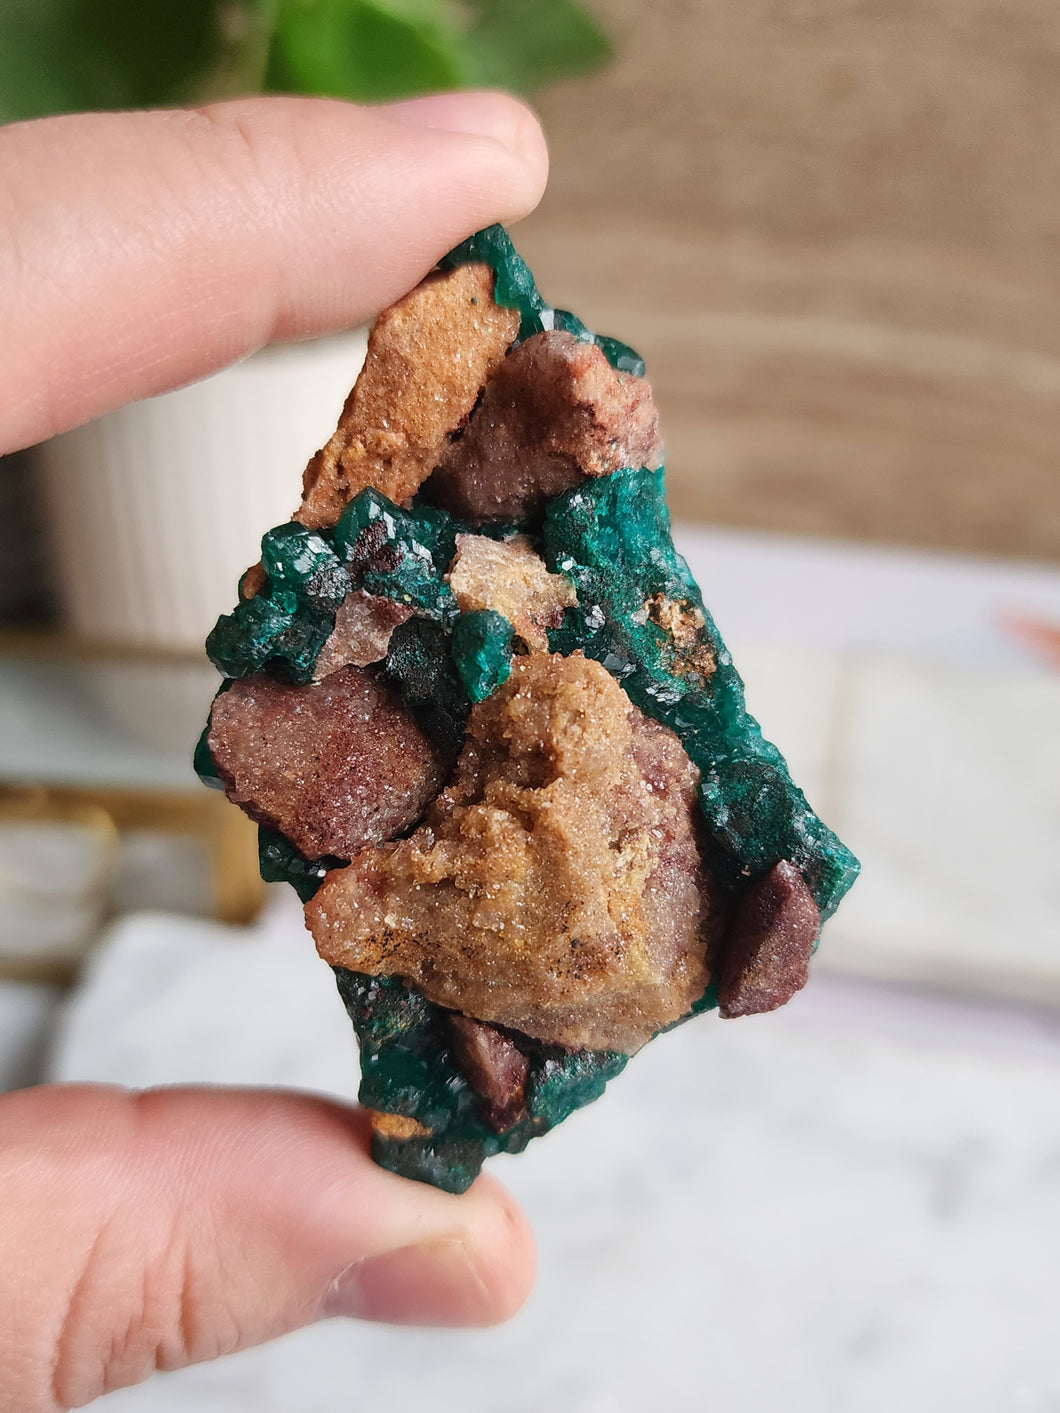 Experience the allure of Dioptase, a mesmerizing mineral prized for its stunning green hue and profound spiritual properties. Rare and uniquely structured, it fosters emotional healing and inner growth, bringing harmony and renewal